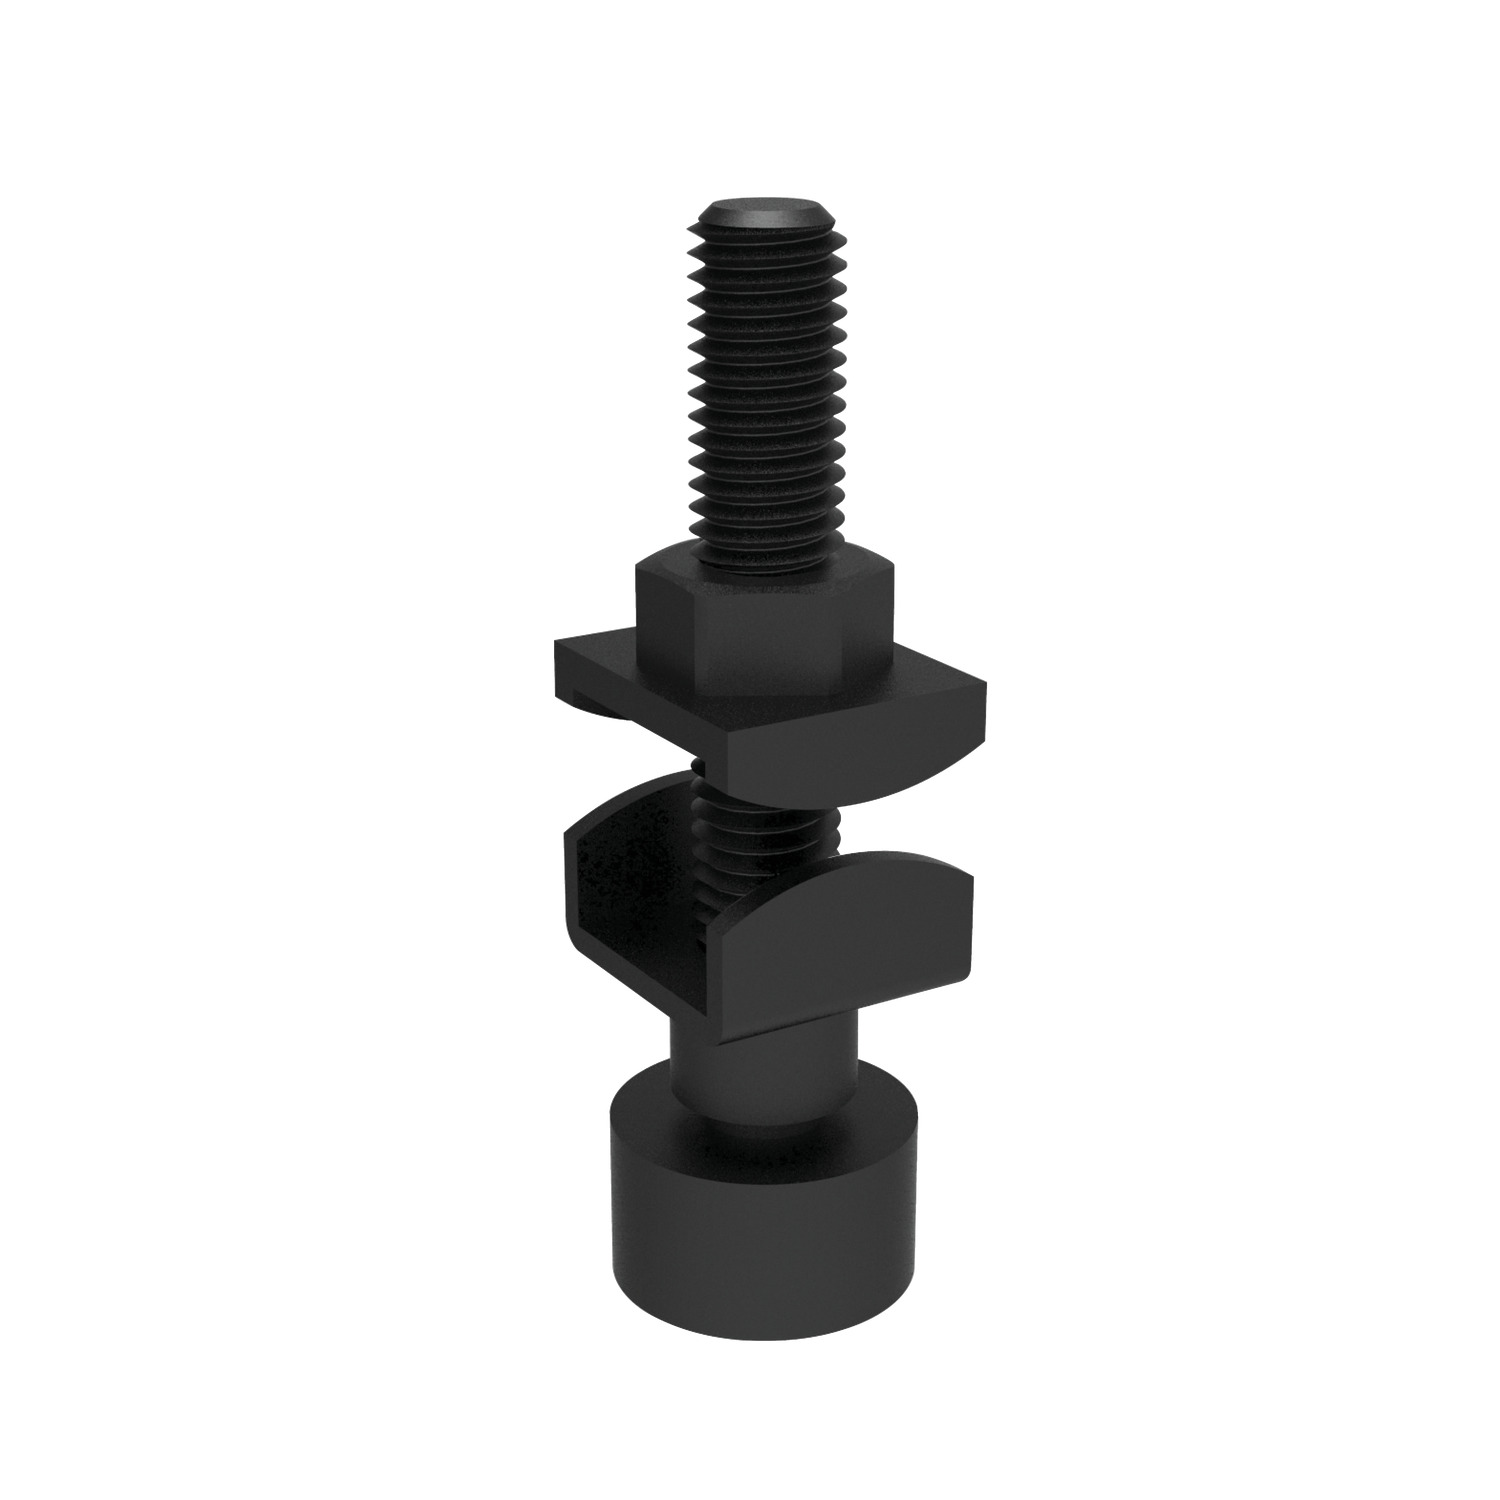 Product 45060.2, Clamping Screw - Black for open clamping arms / 